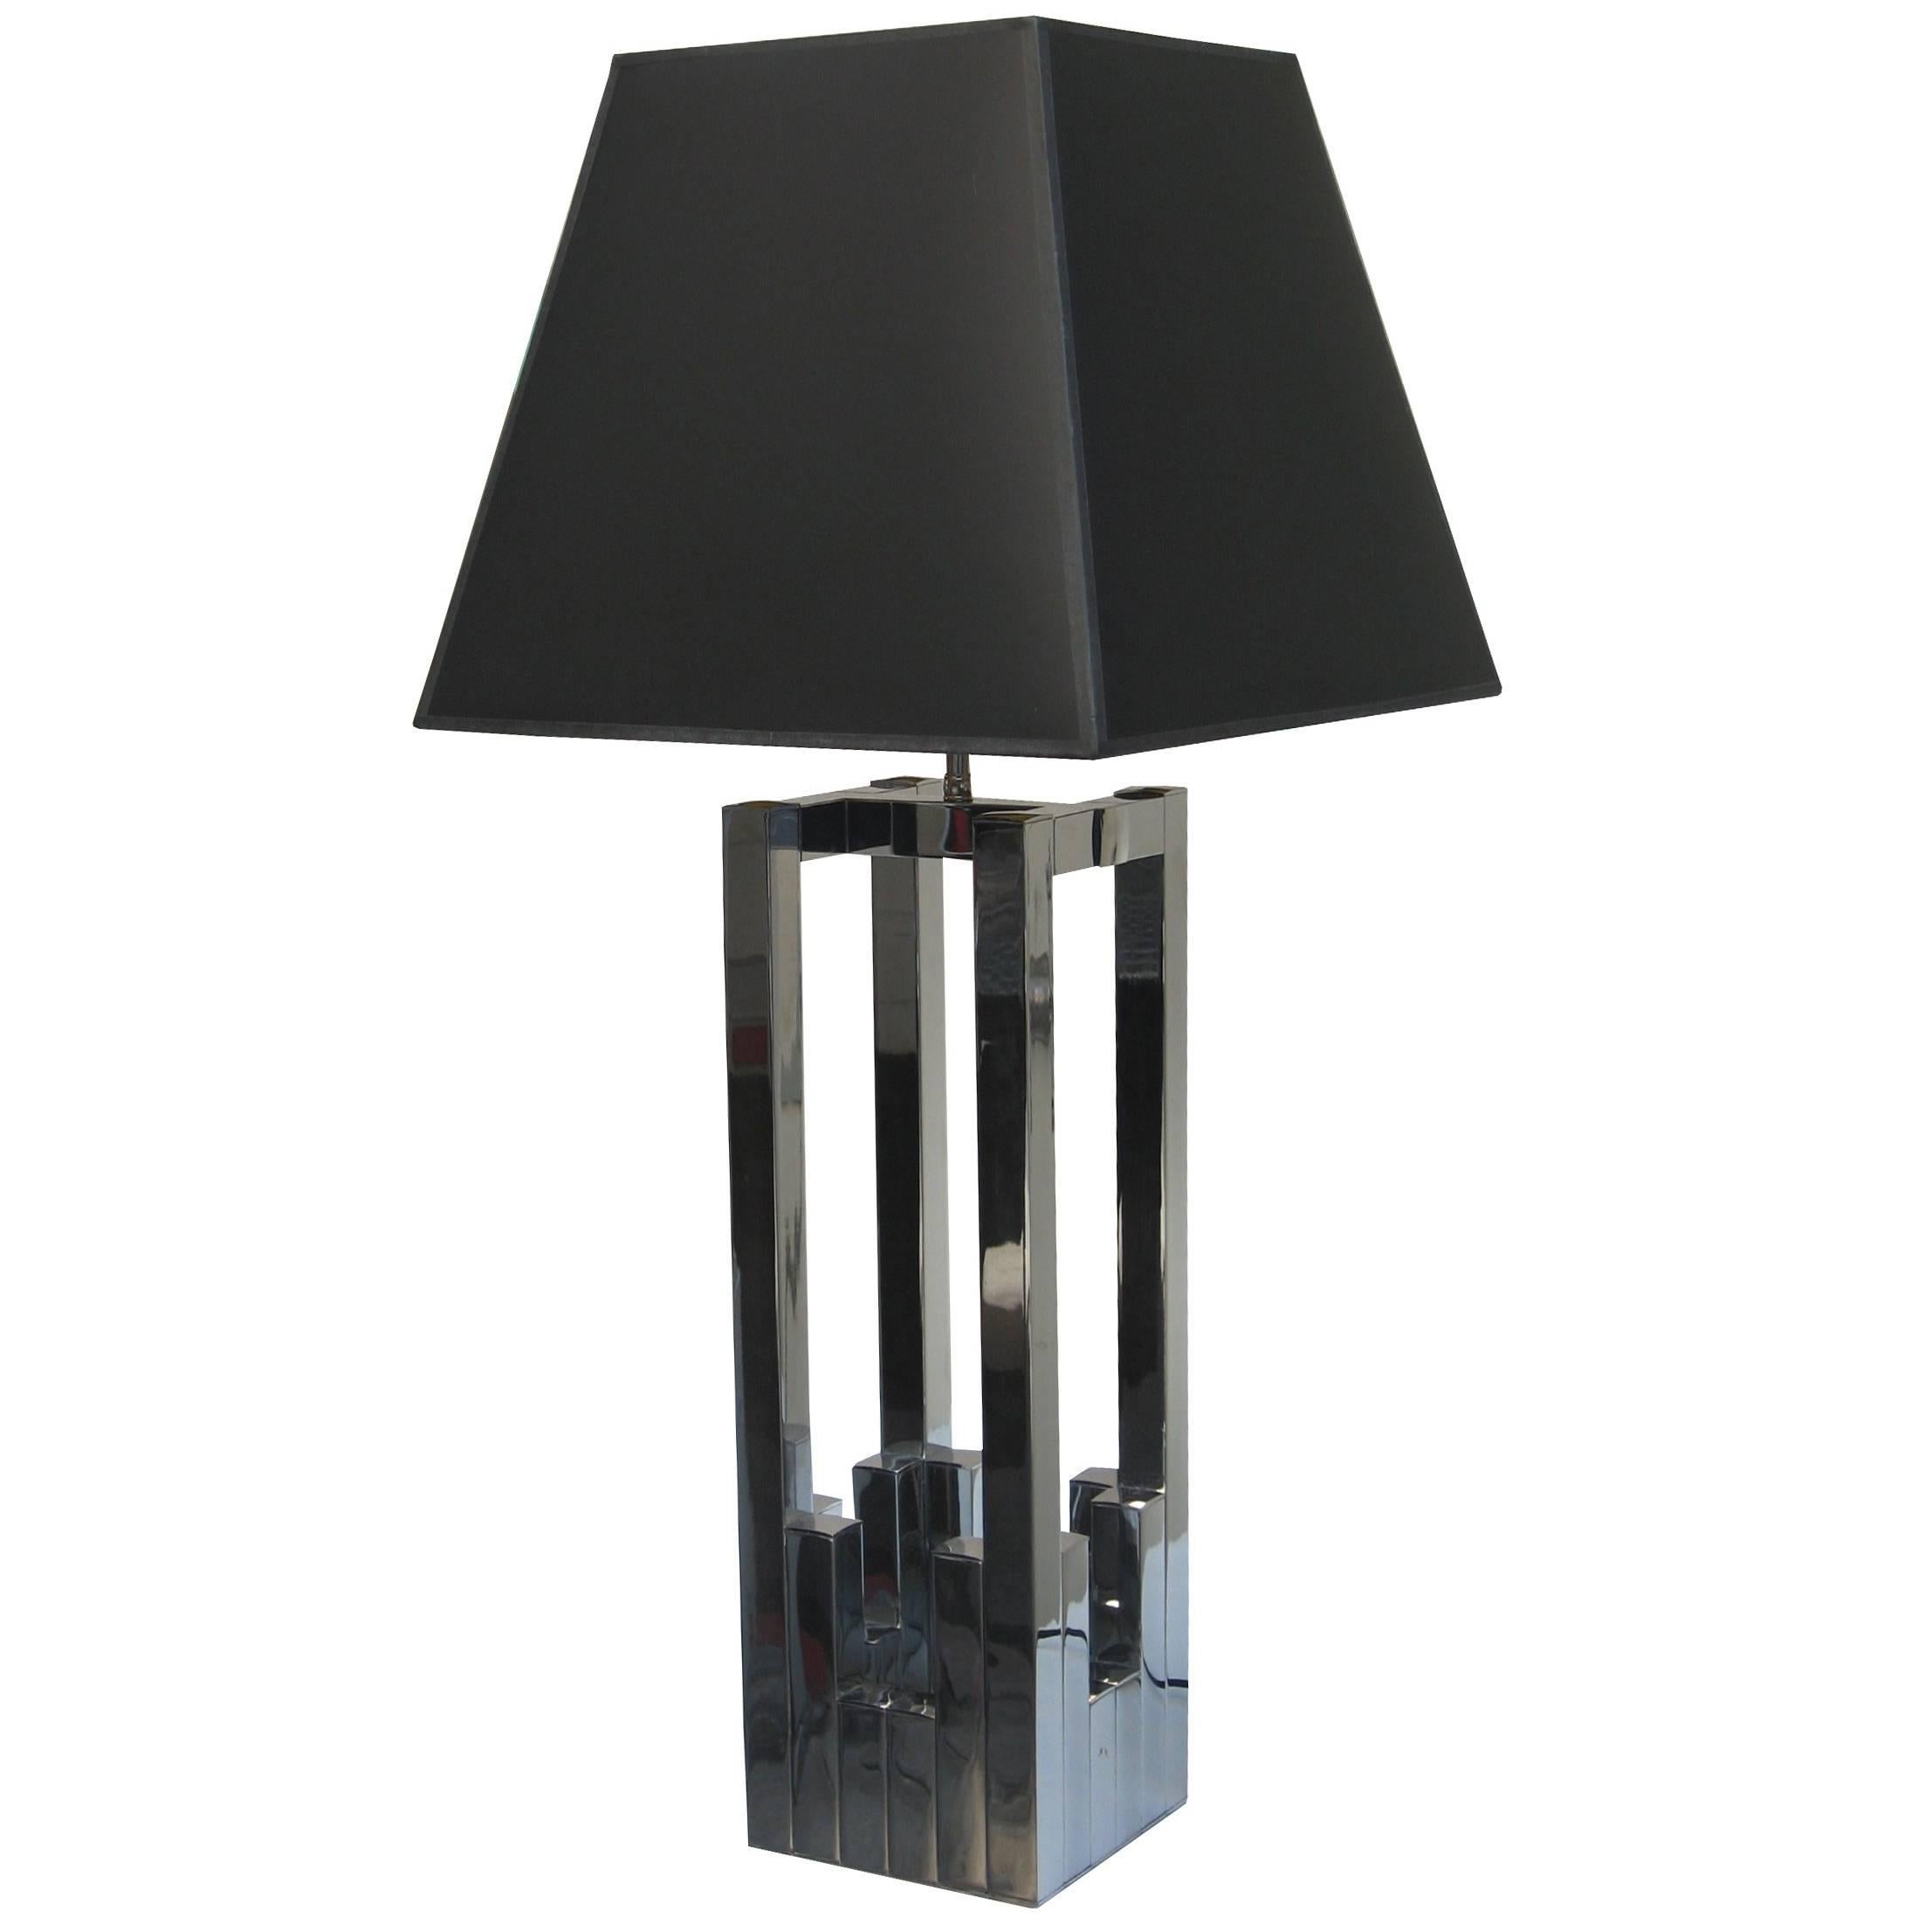 Willy Rizzo Designed Modernist Desk Lamp